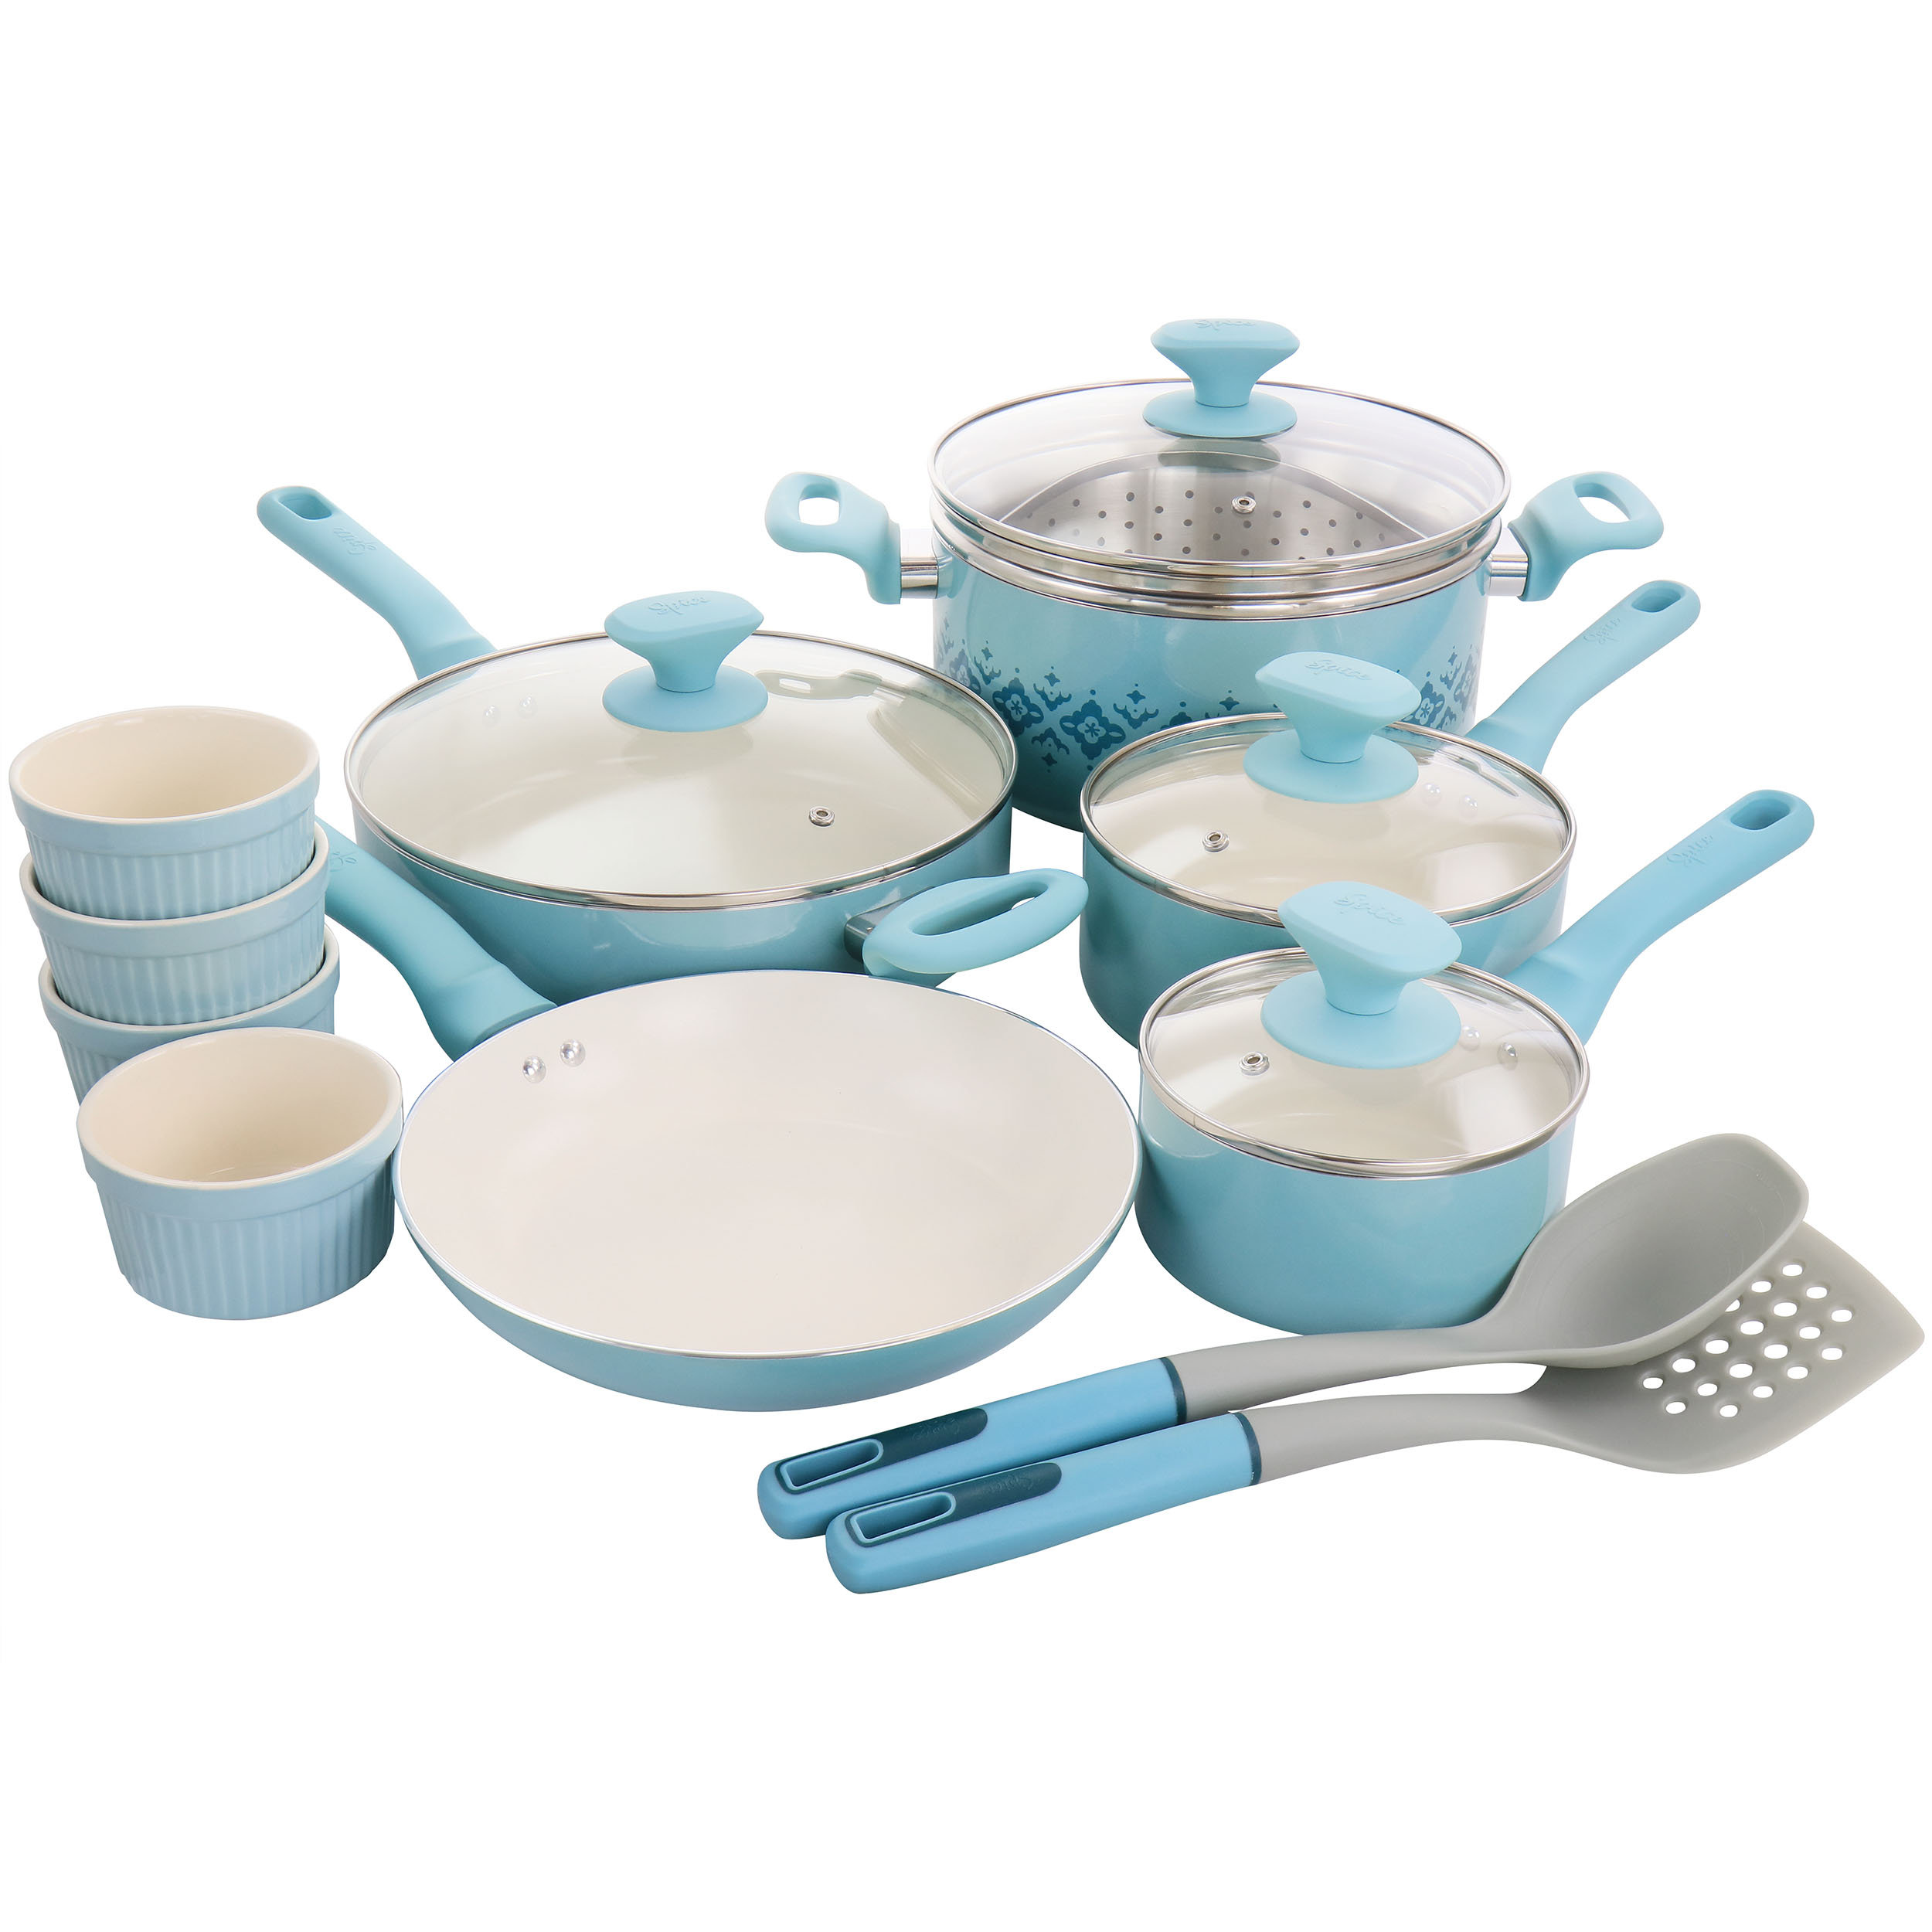 14 Pc Ceramic Induction-Ready Cookware Set Teal - Tramontina US